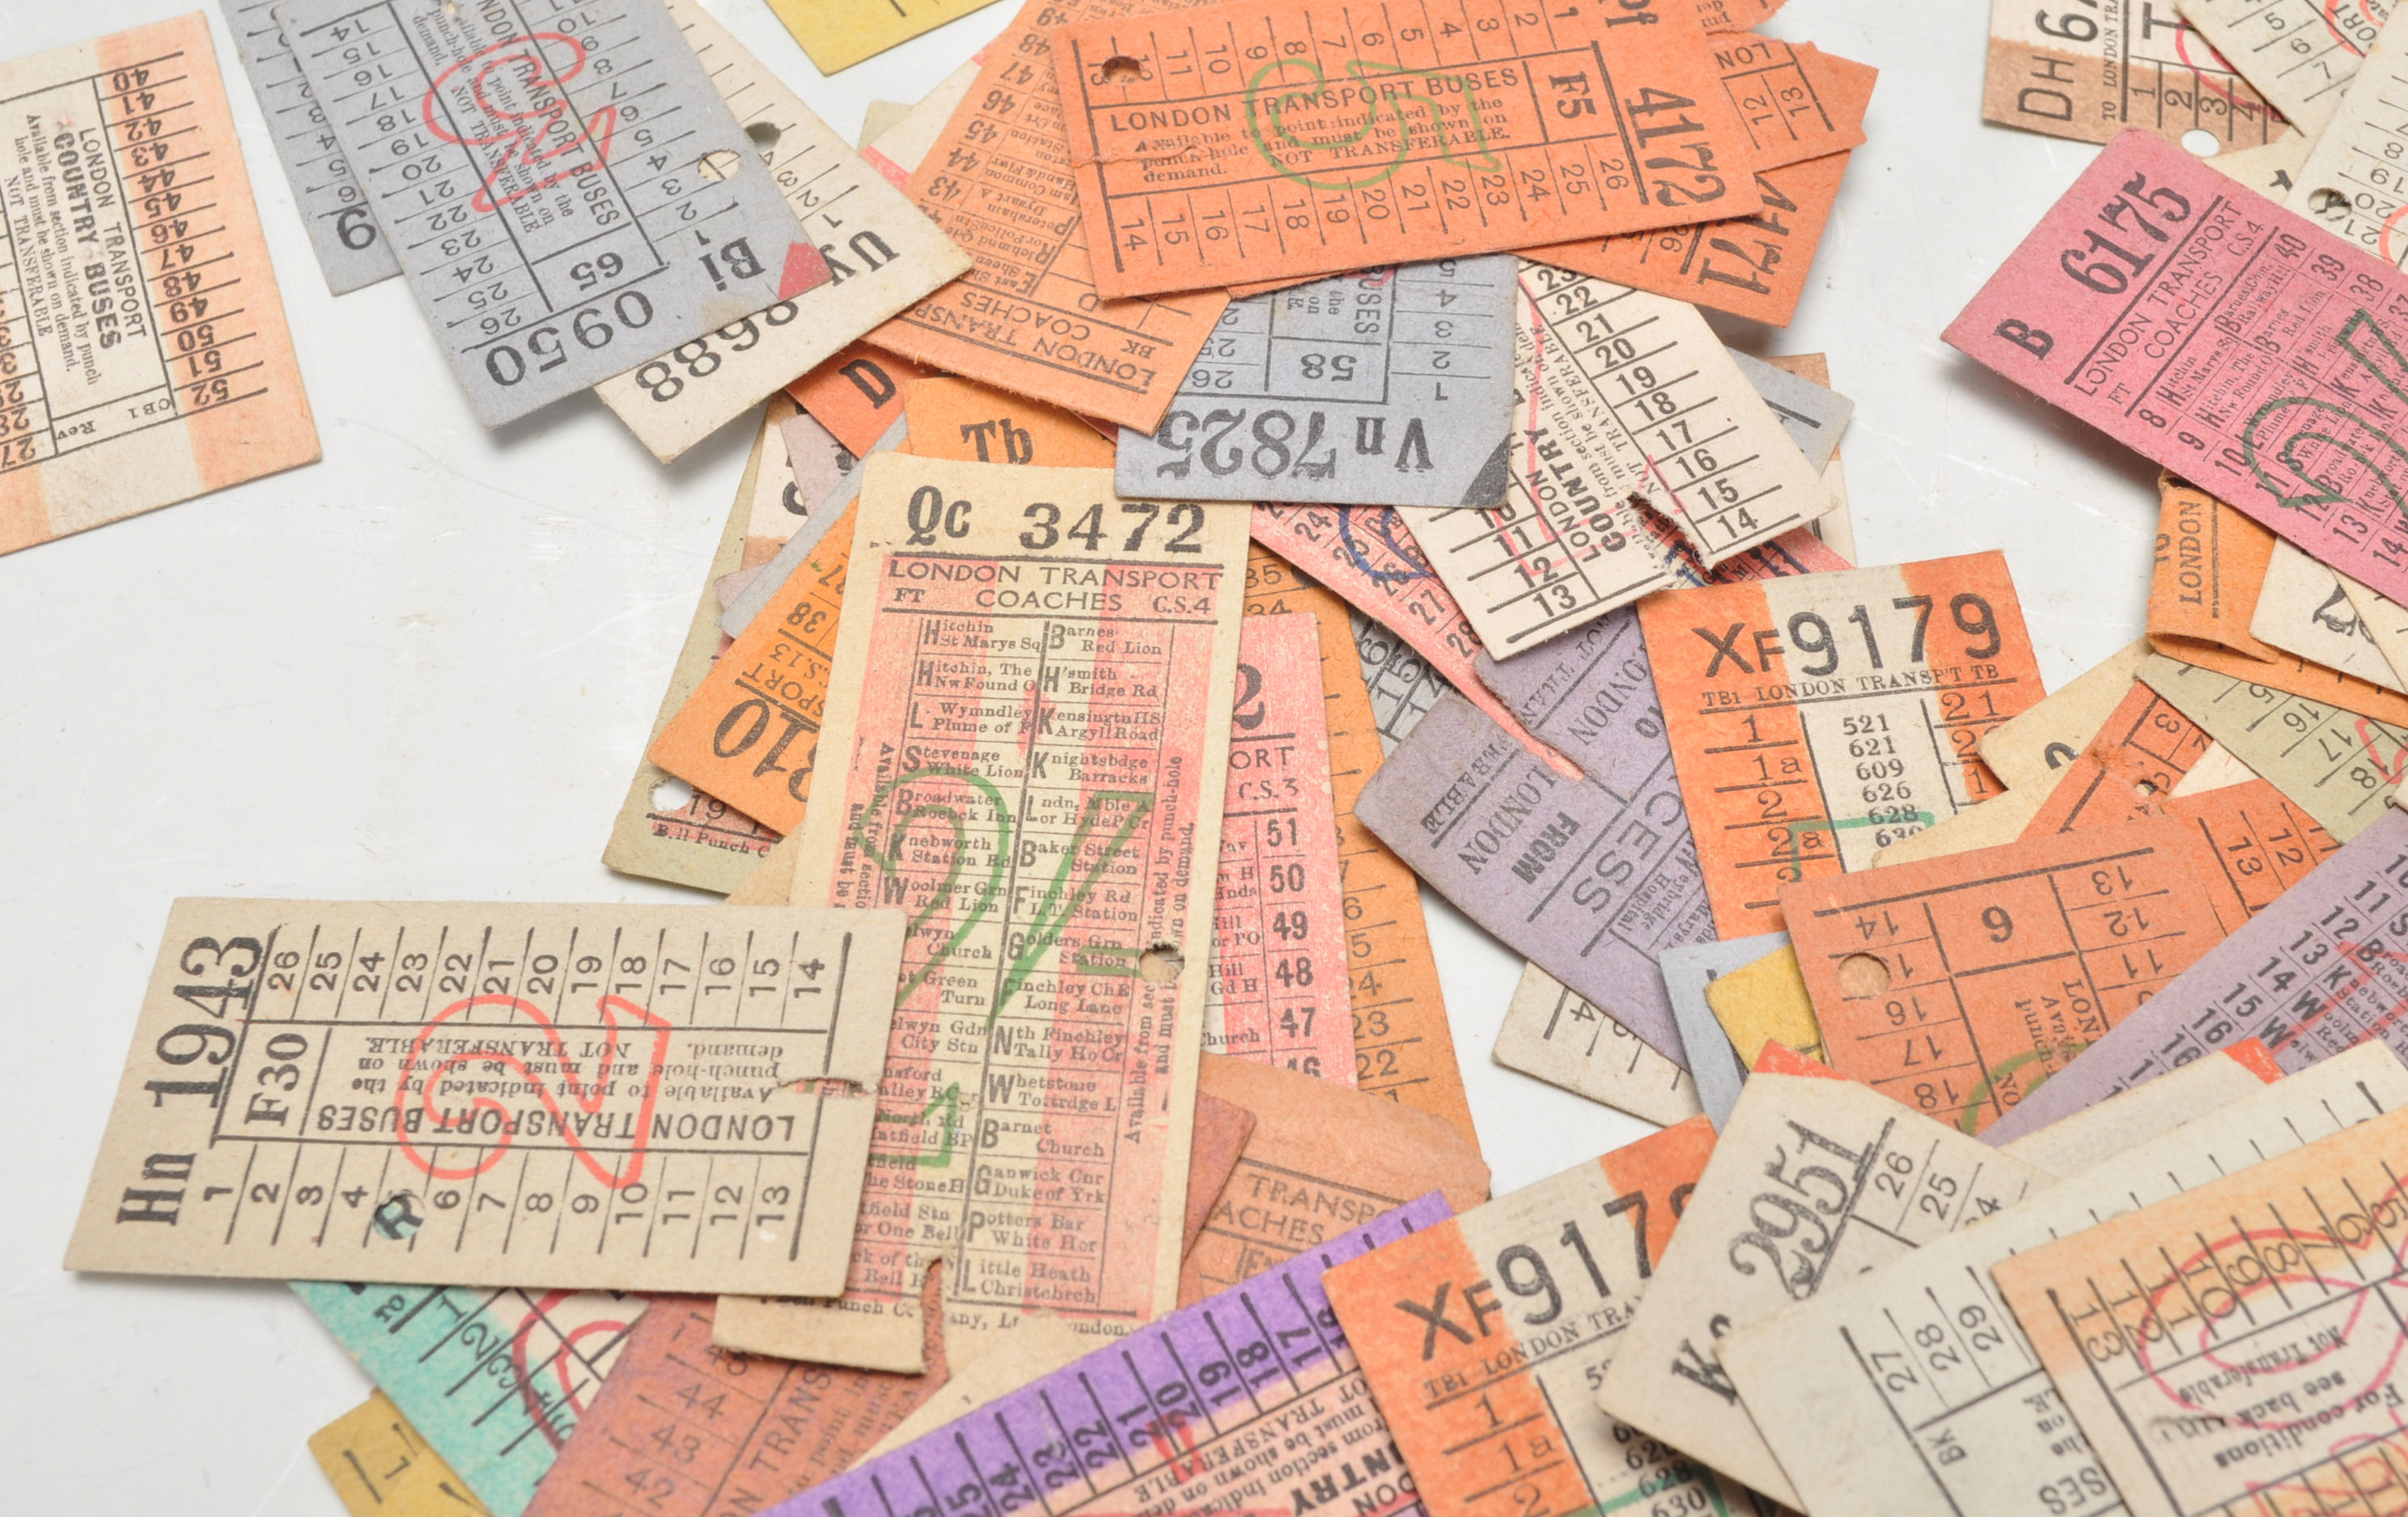 Bus Tickets. Job lot (x175) of vintage London Transport tickets. Buses, Coaches and Country - Image 3 of 7